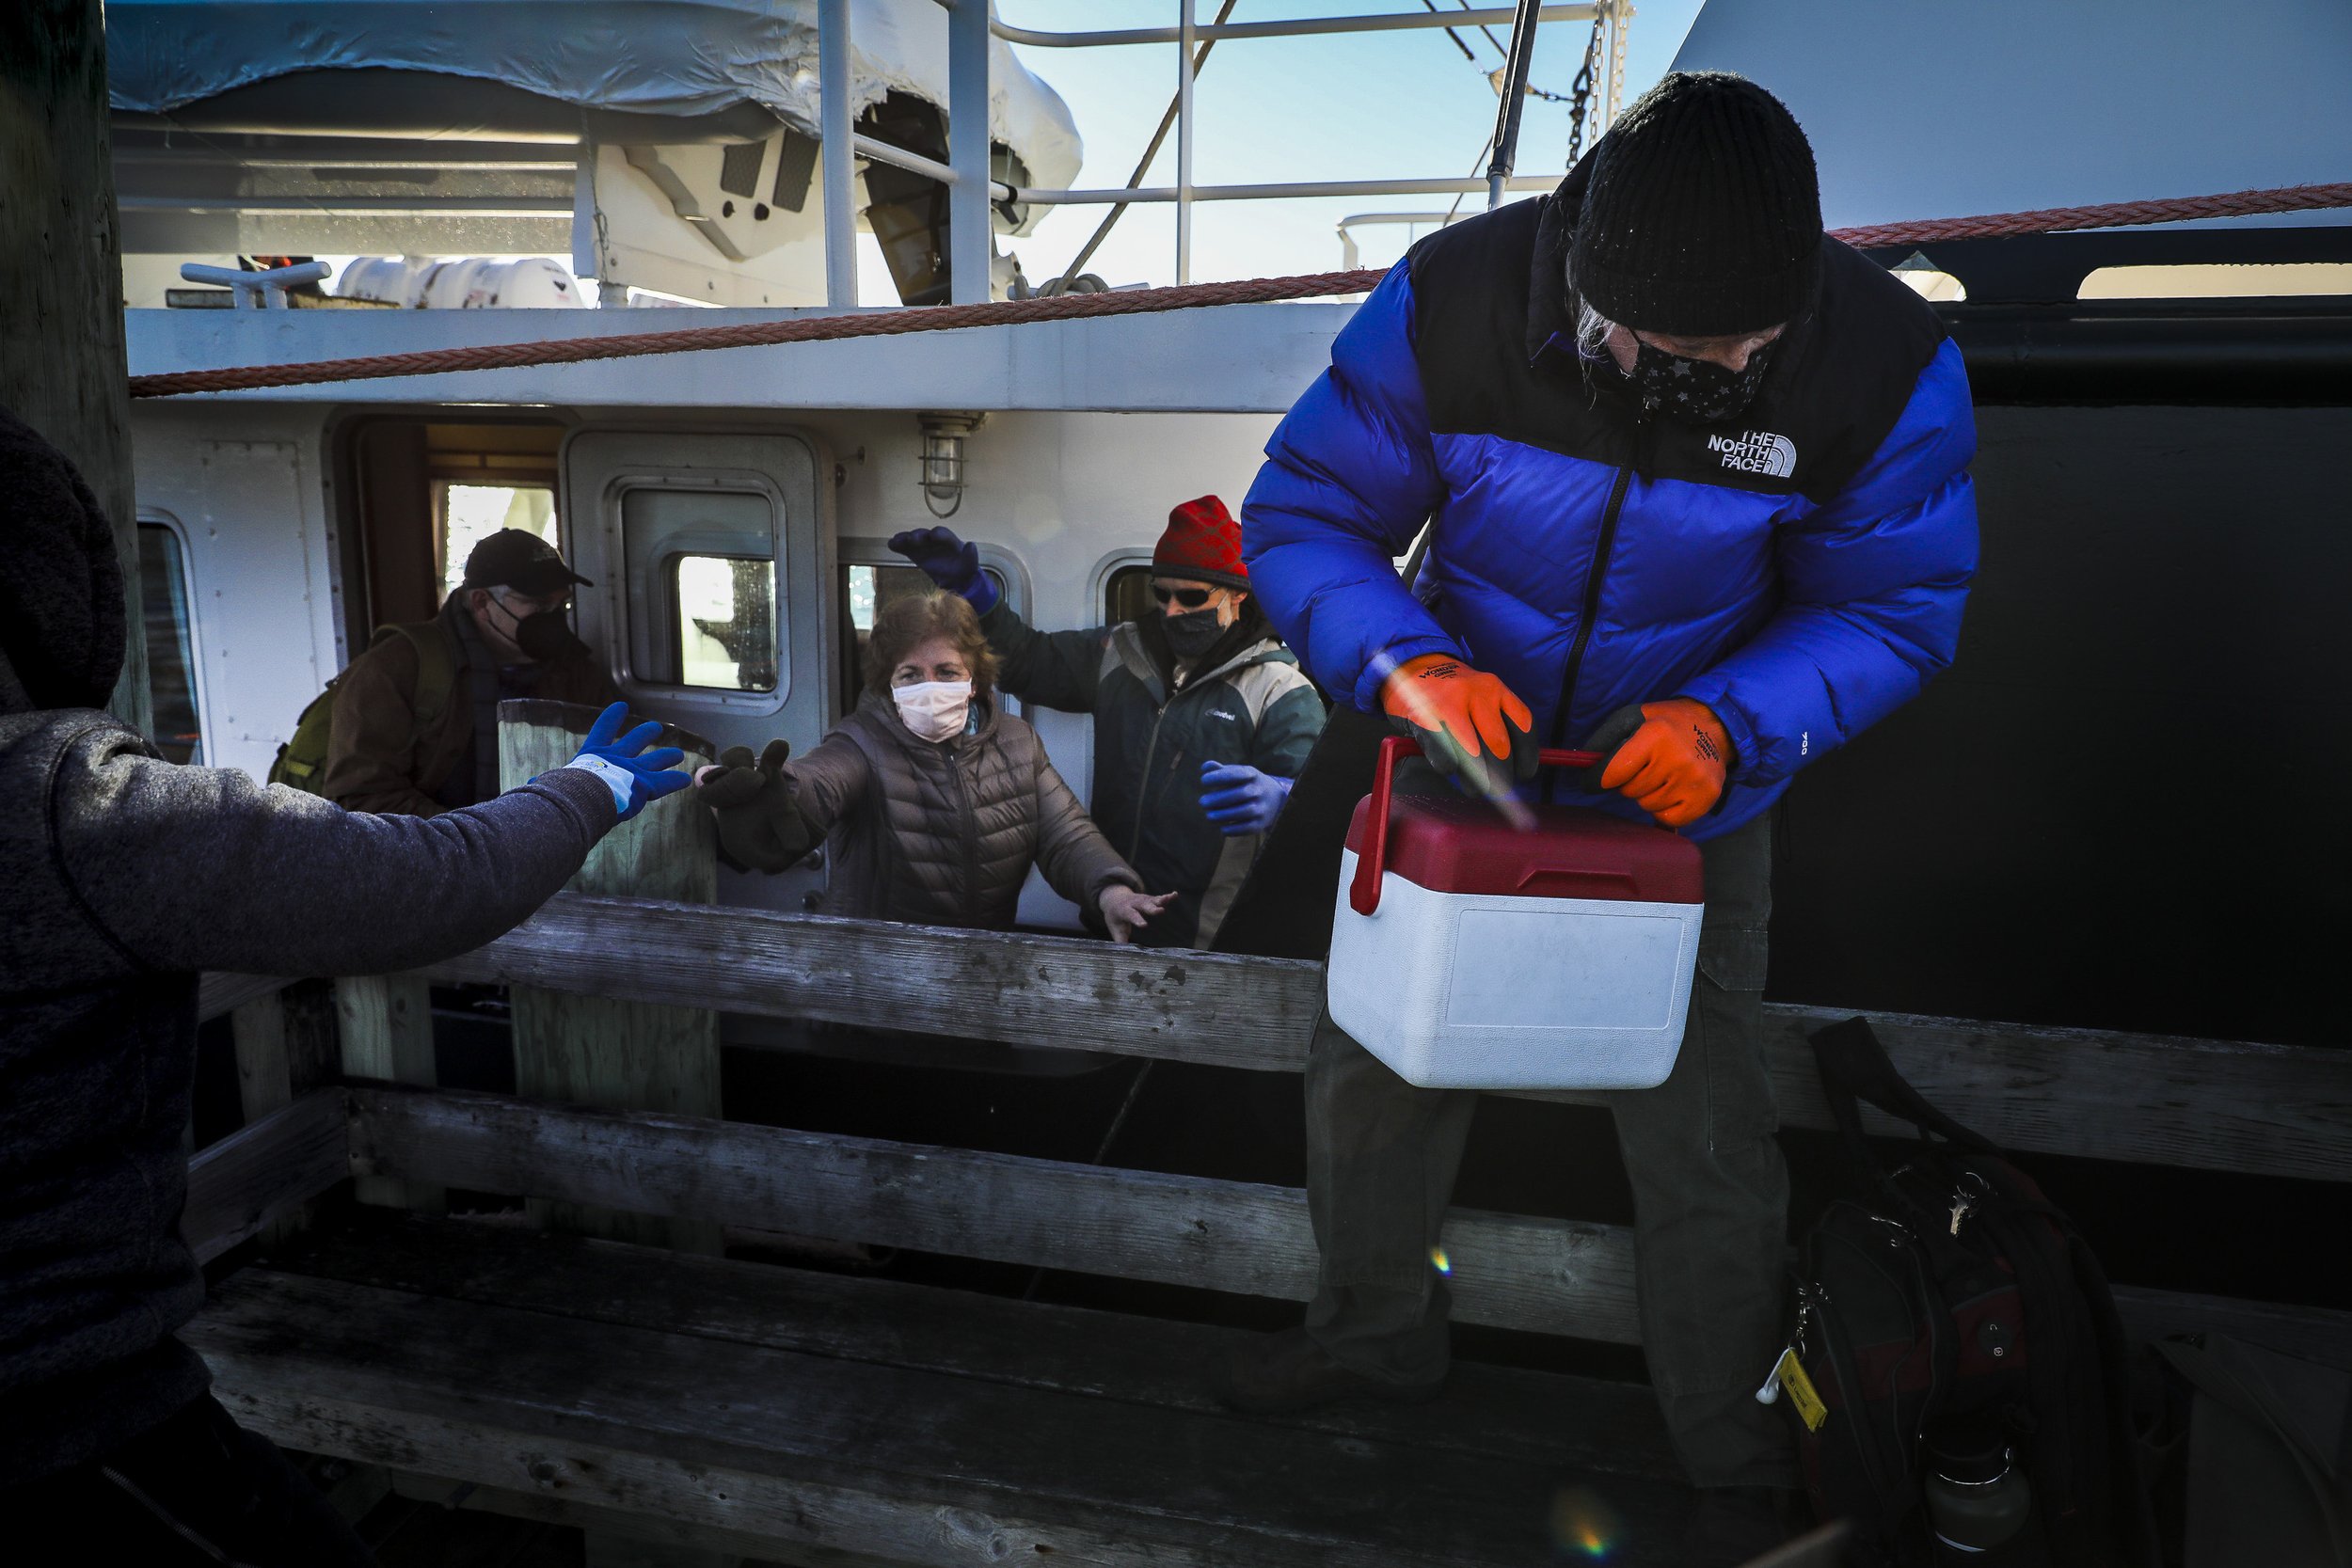  Sunbeam Engineer Storey King takes the vaccine cooler off the Sunbeam as the Seacoast Mission crew arrives at Great Cranberry Island, ME, the crews first stop after leaving their home base of Northeast Harbor on February 26, 2021. From Friday to Sat